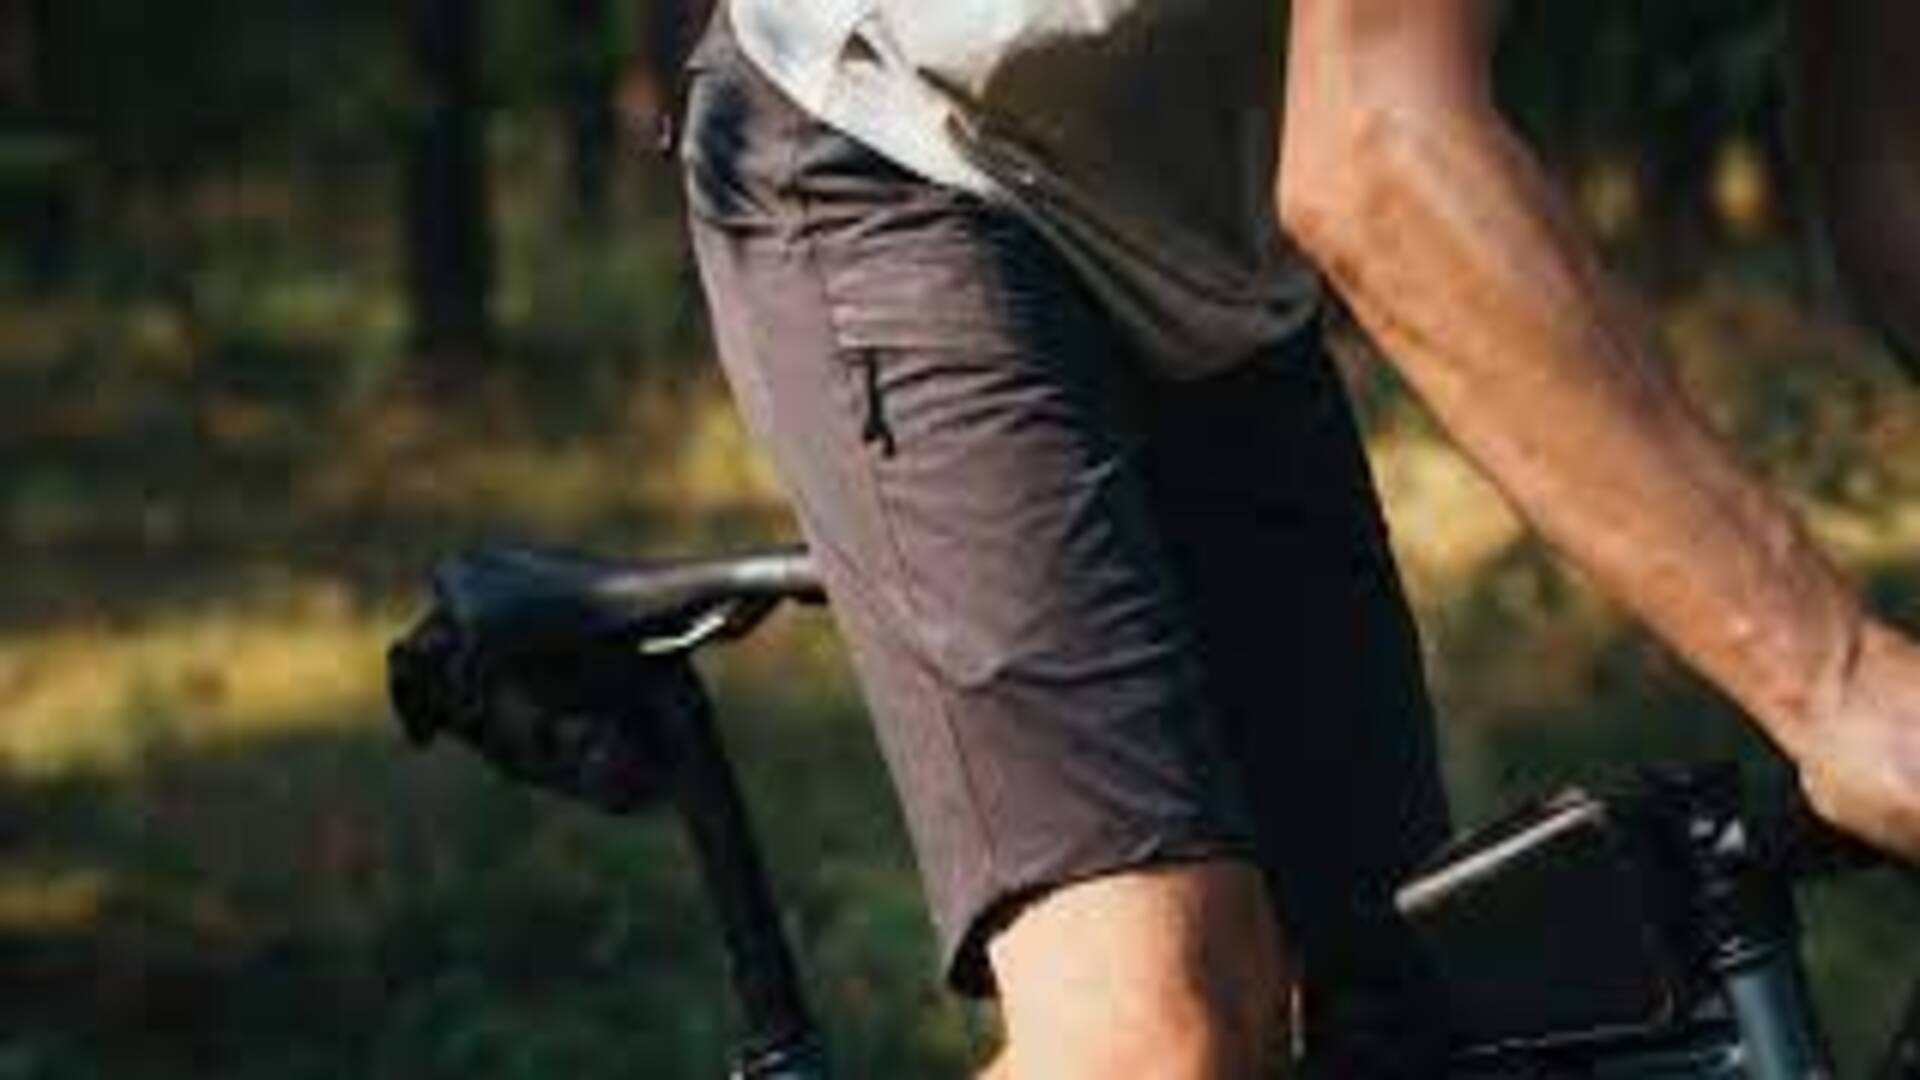 Weight Cycling, only helpful for temporary weight loss, suggests study